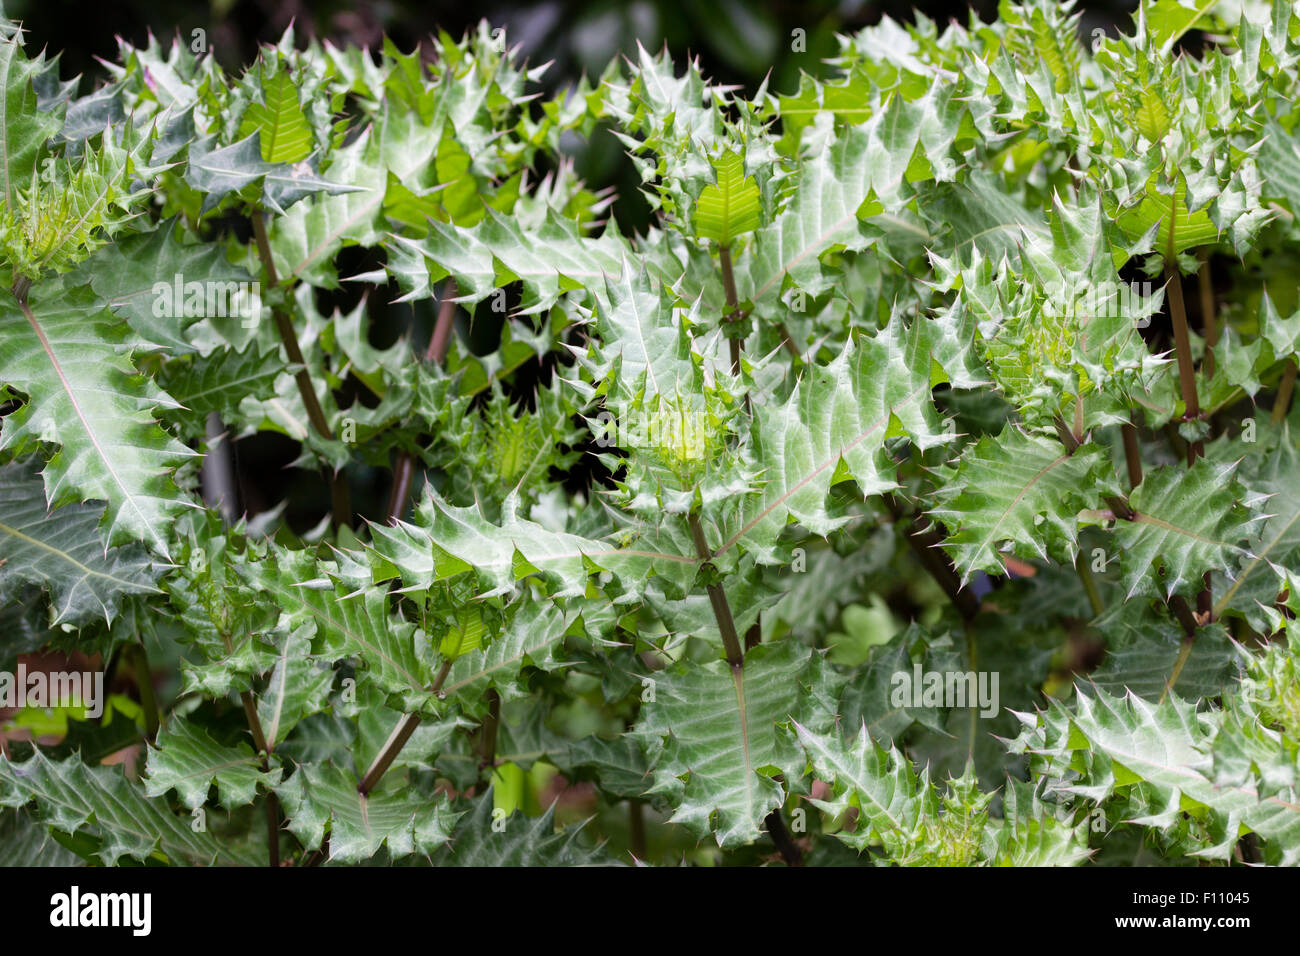 Summer foliage of the spiky leaved perennial, Acanthus sennii Stock Photo